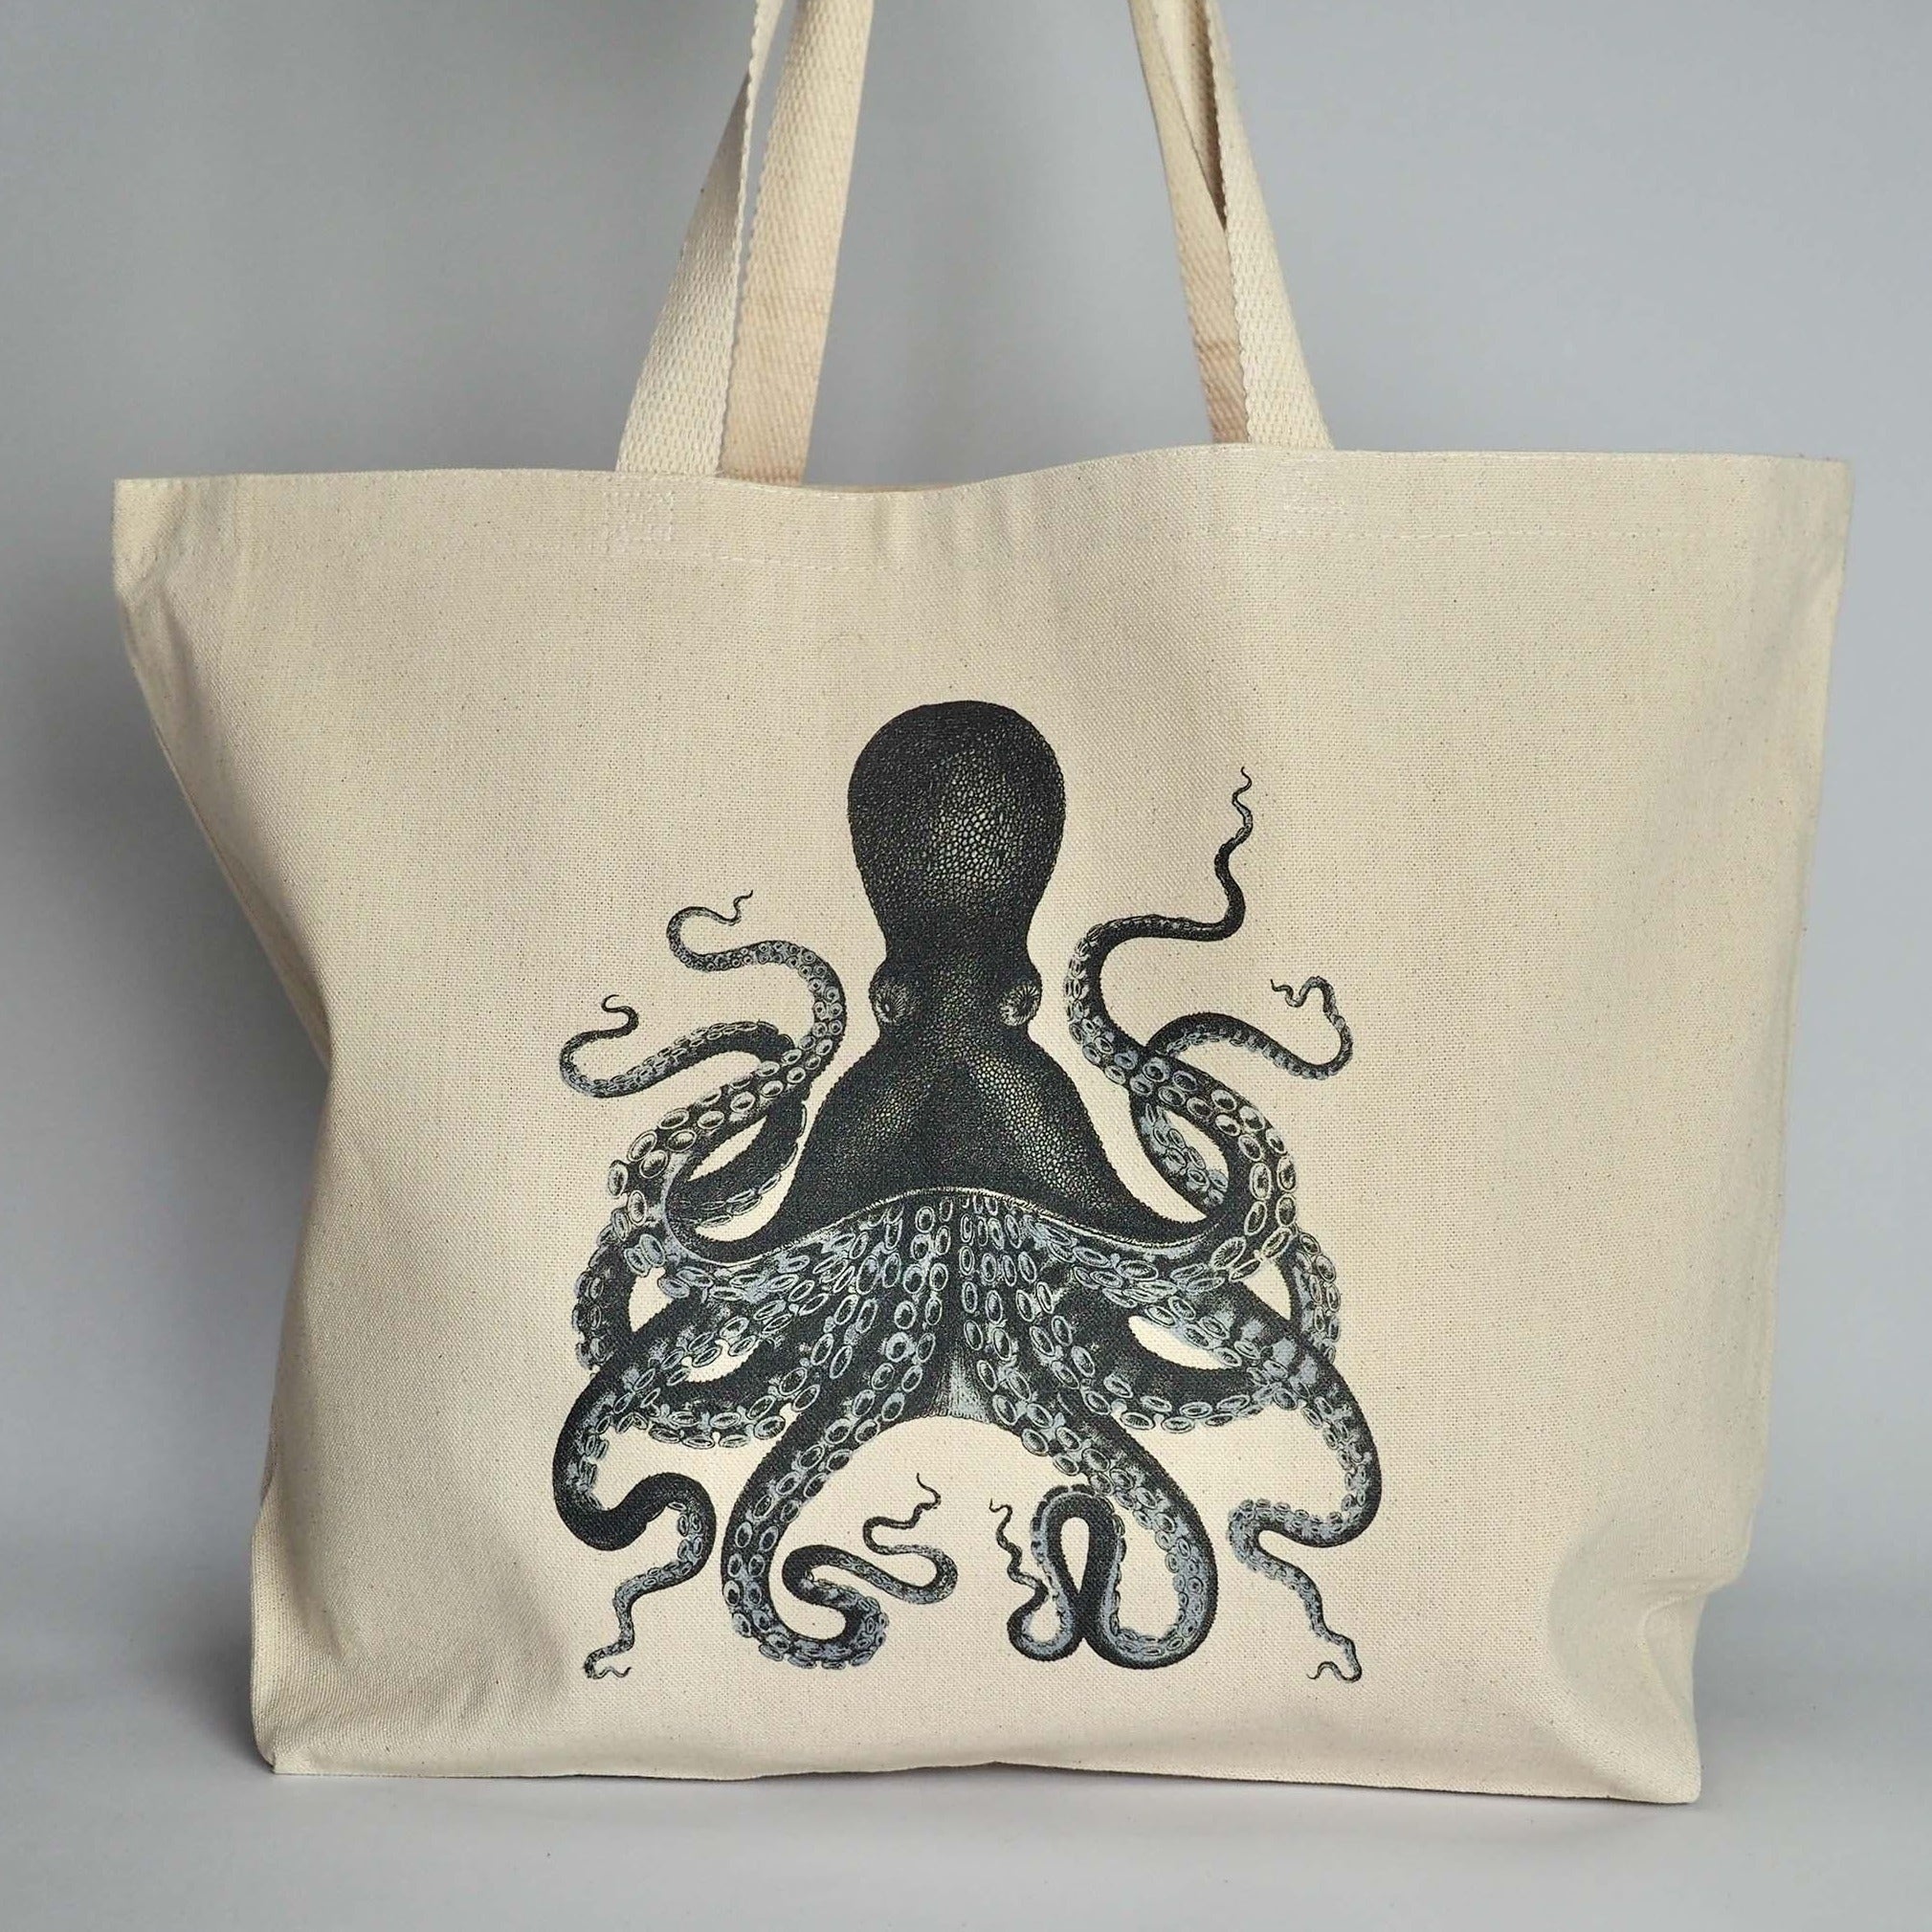 XL Canvas Tote Bag with a fun crab print design on front in coral and with handles folded over.